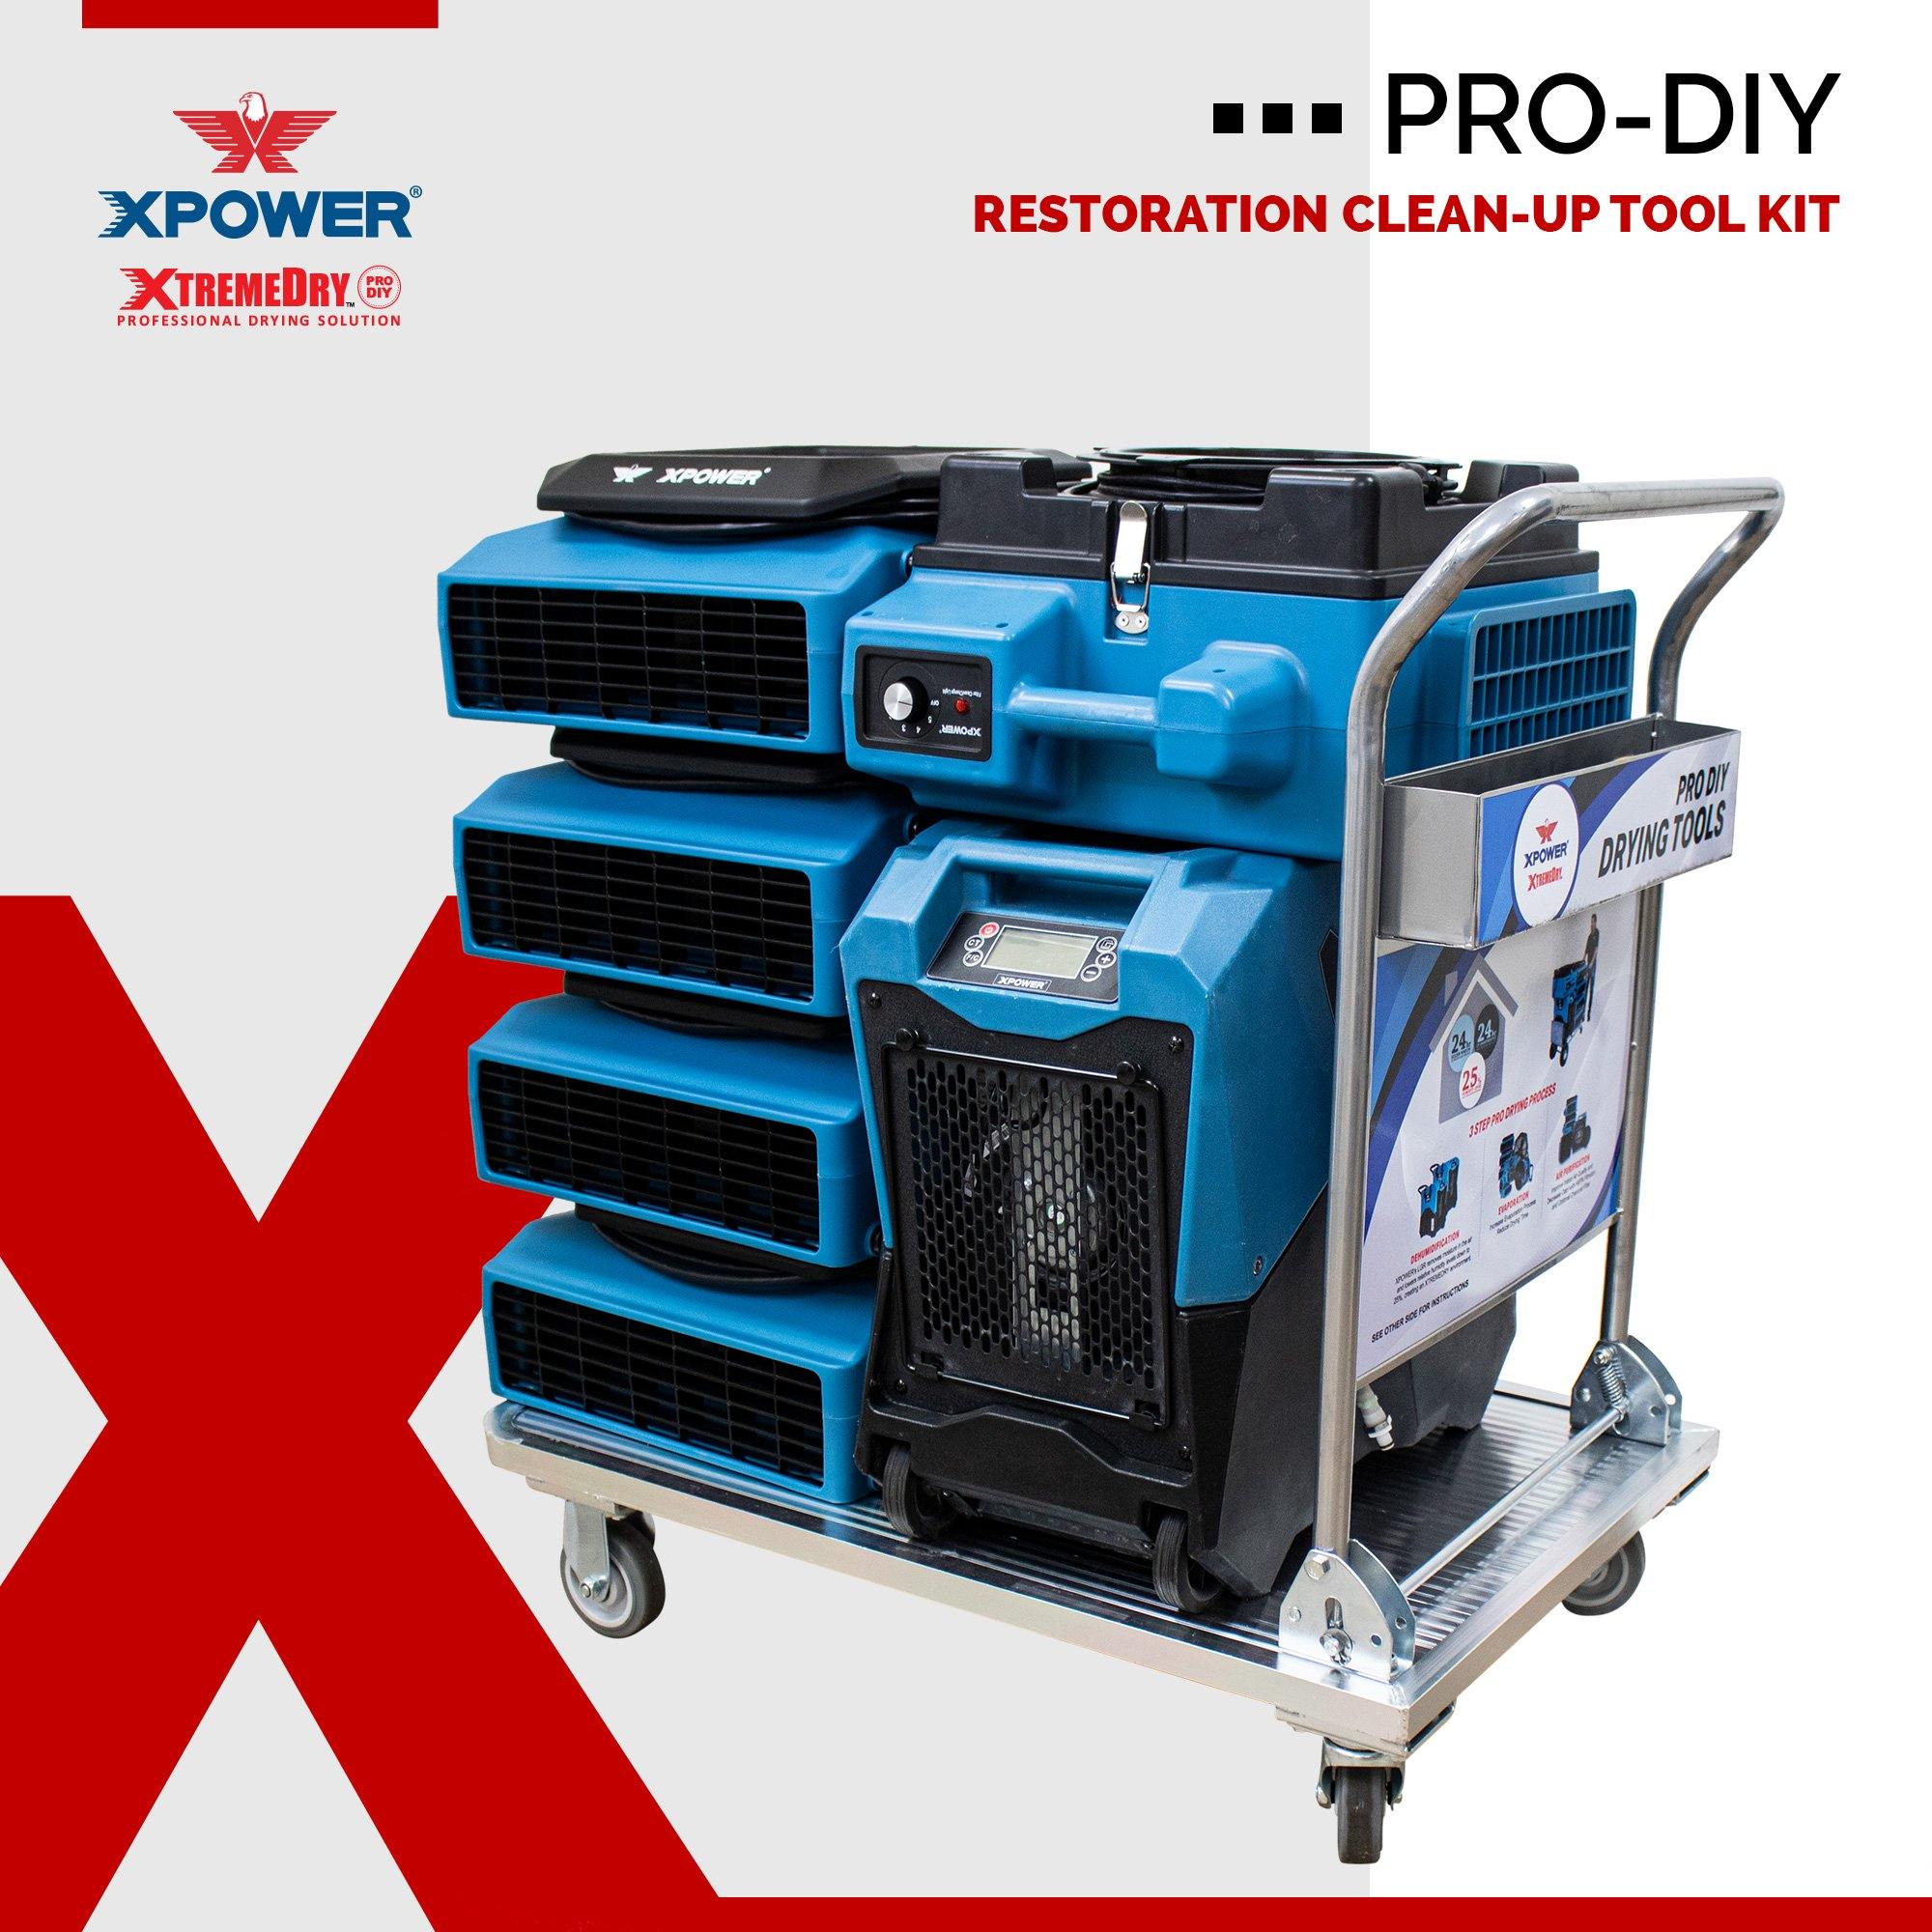 XPOWER XtremeDry® Pro-DIY Restoration Clean-Up Tool Kit